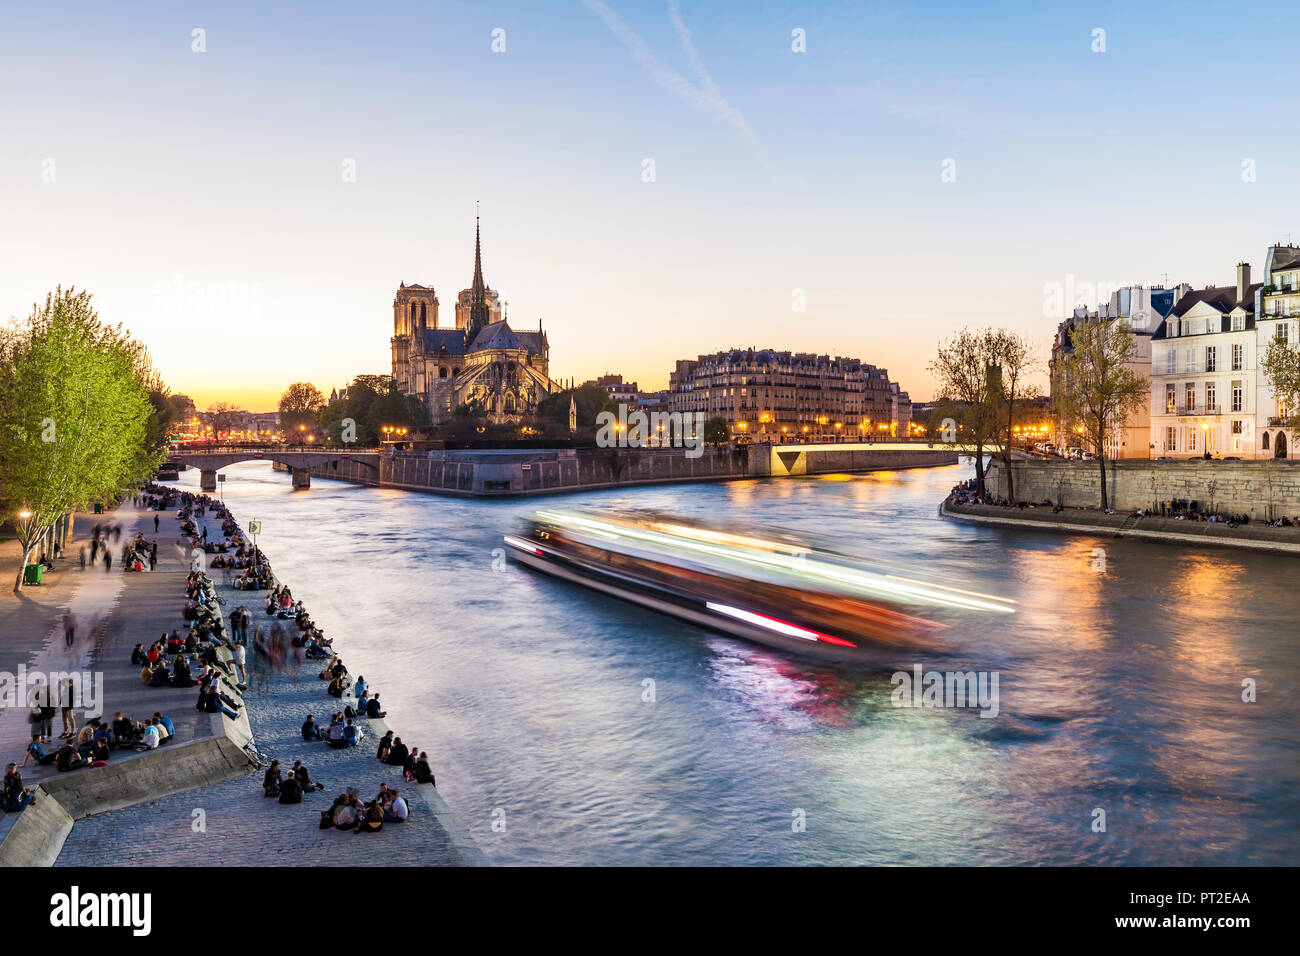 France, Paris, Tourist boat on Seine river with Notre Dame cathedral in background Stock Photo